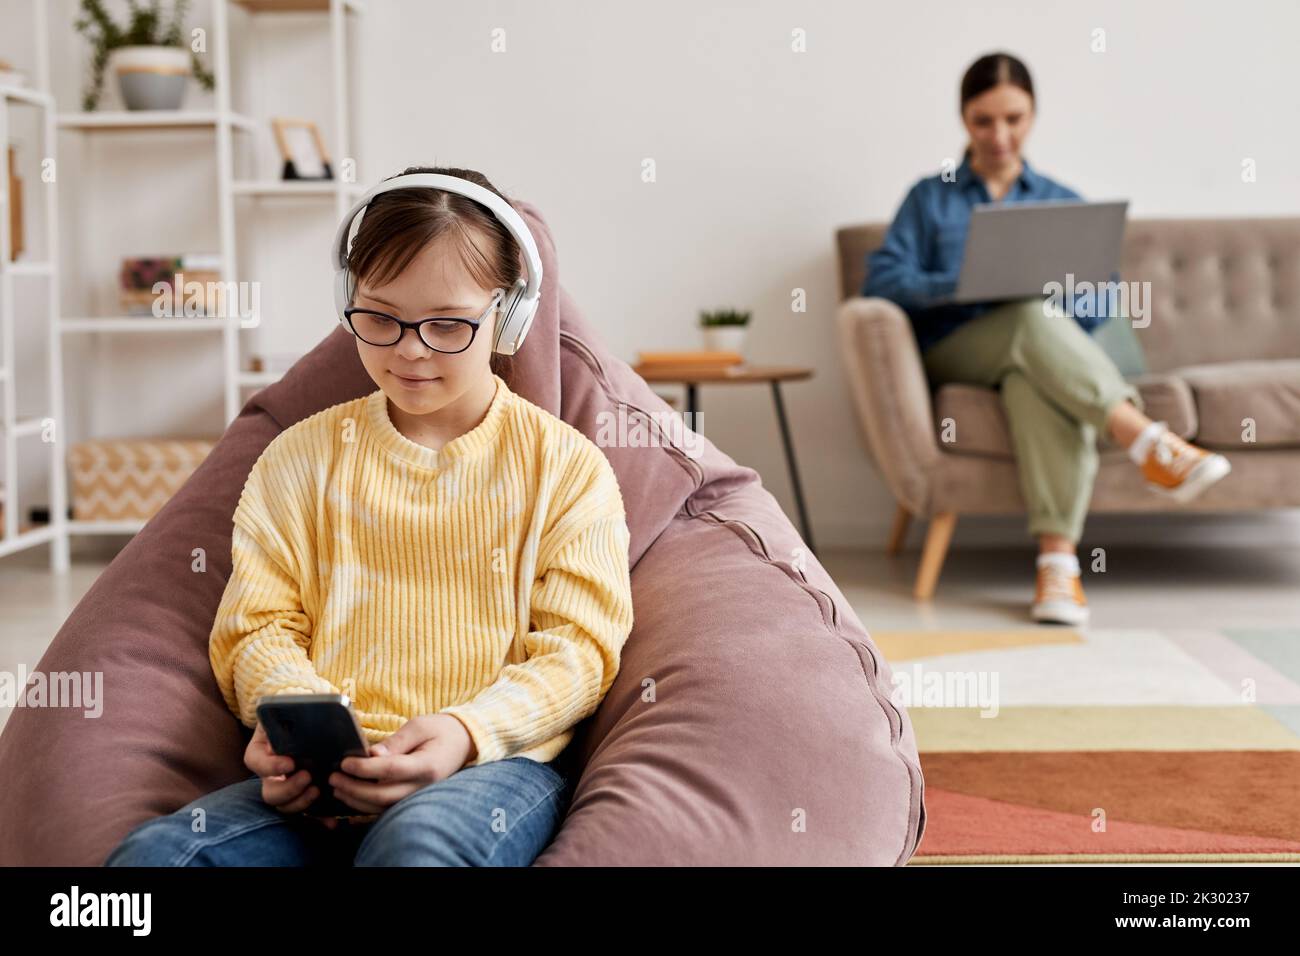 Portrait of teen girl with Down syndrome playing mobile games at home with parent supervision, copy space Stock Photo